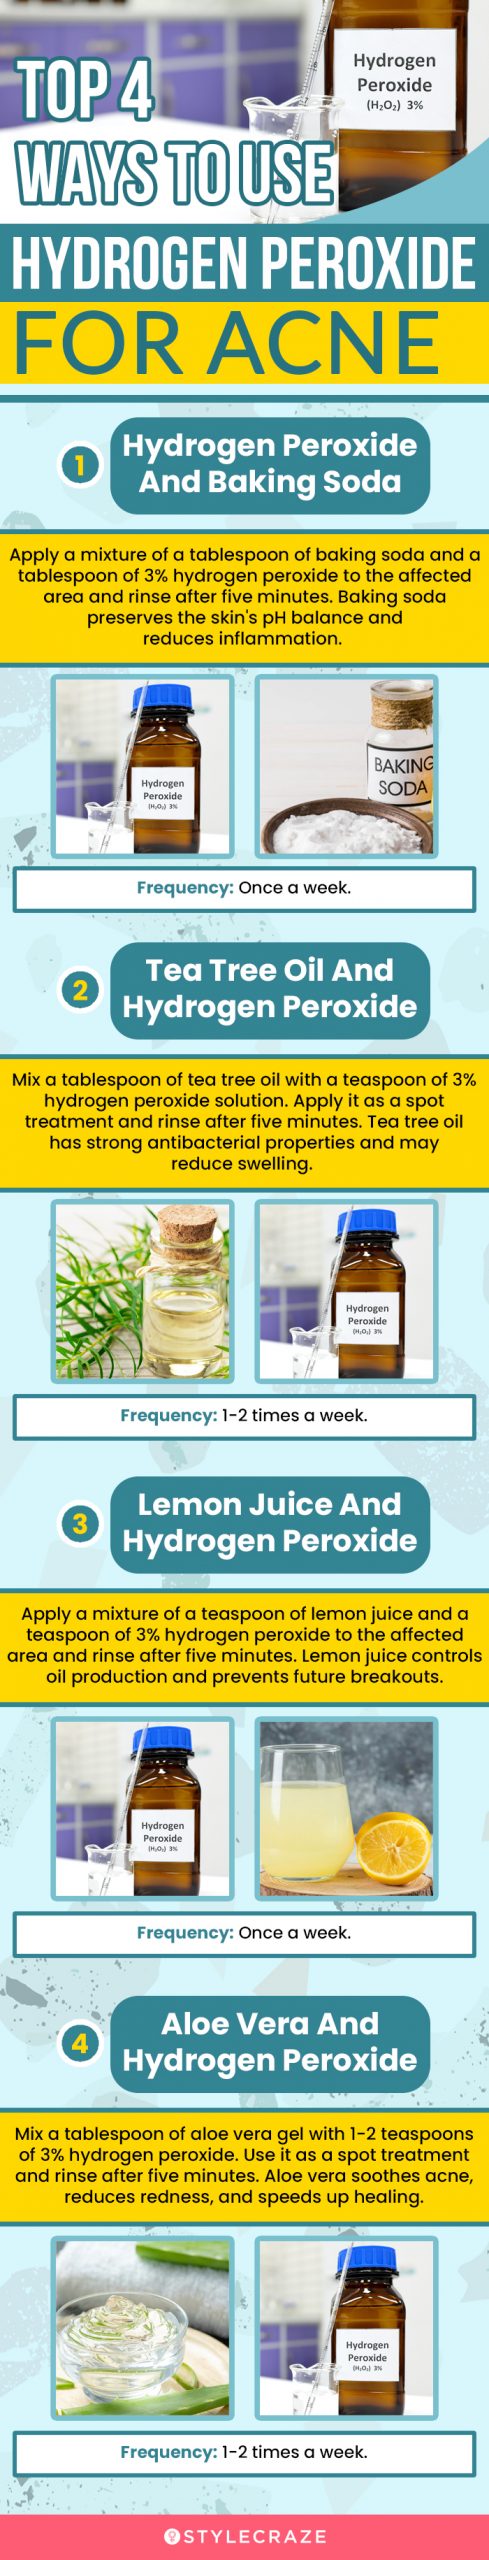 top 4 ways to use hydrogen peroxide for acne (infographic)